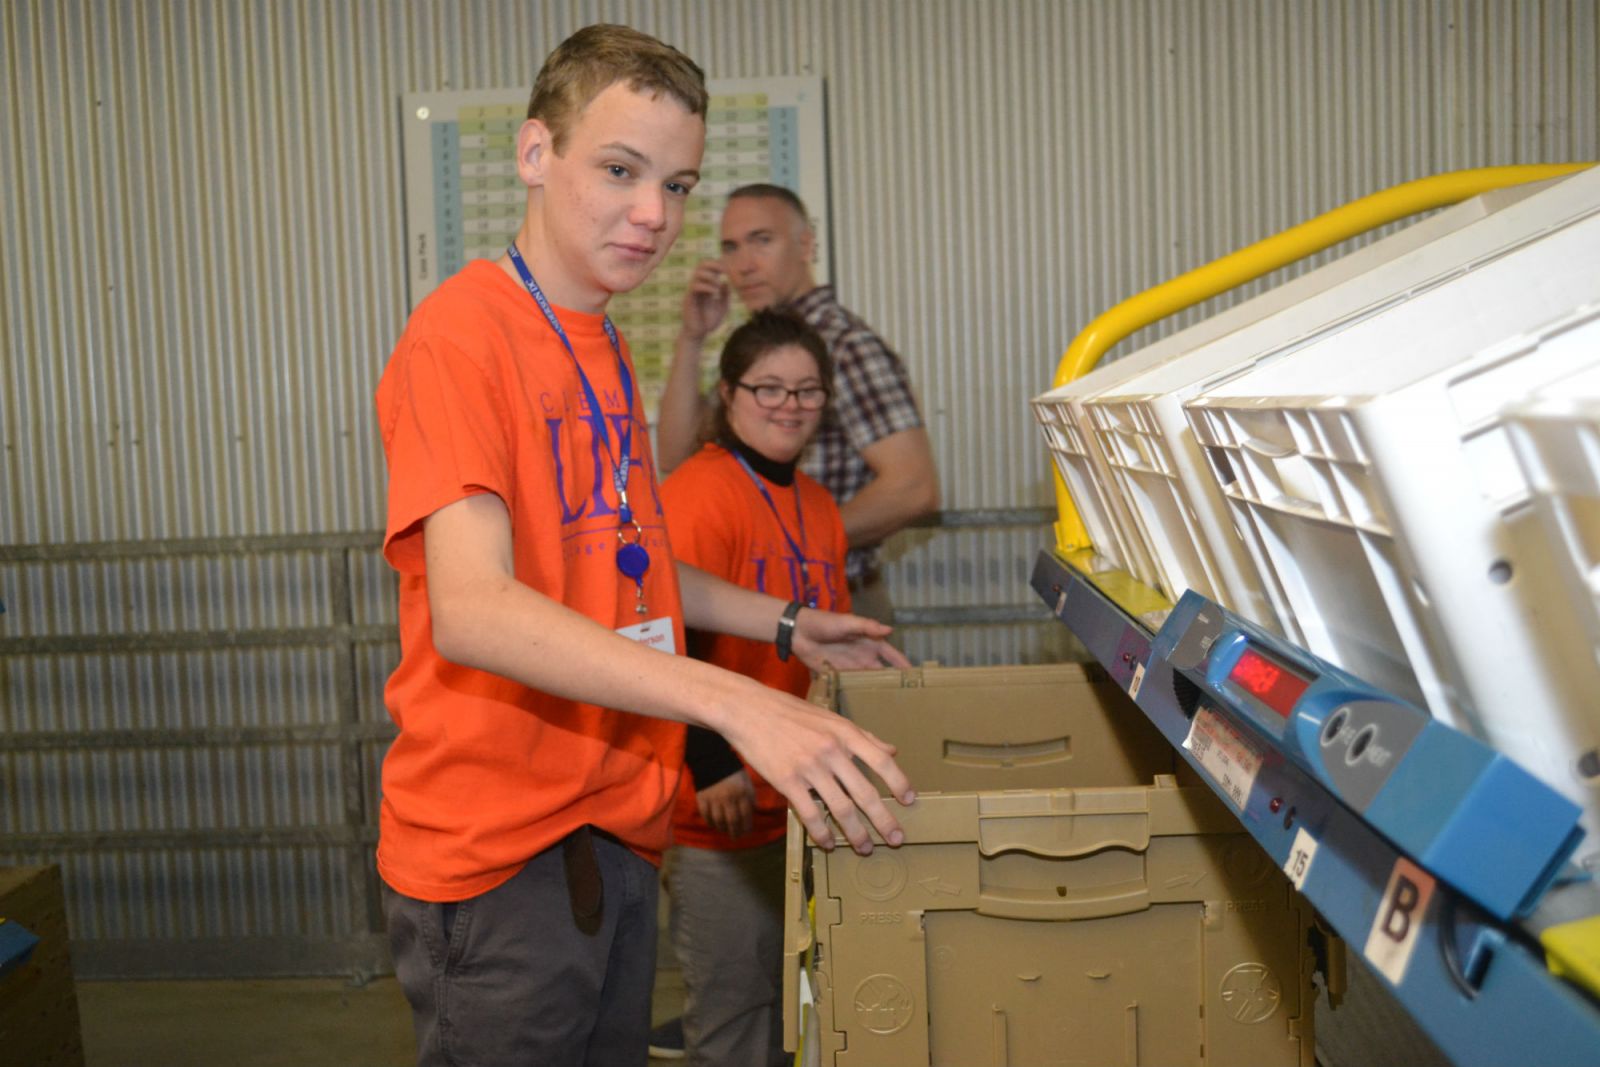 Sam Mungo and Emma Adams, ClemsonLIFE students, train for work at the Walgreens Distribution Center, which resupplies retail items at Walgreens stores from Washington, D.C., to Florida. (Photo/Ross Norton)